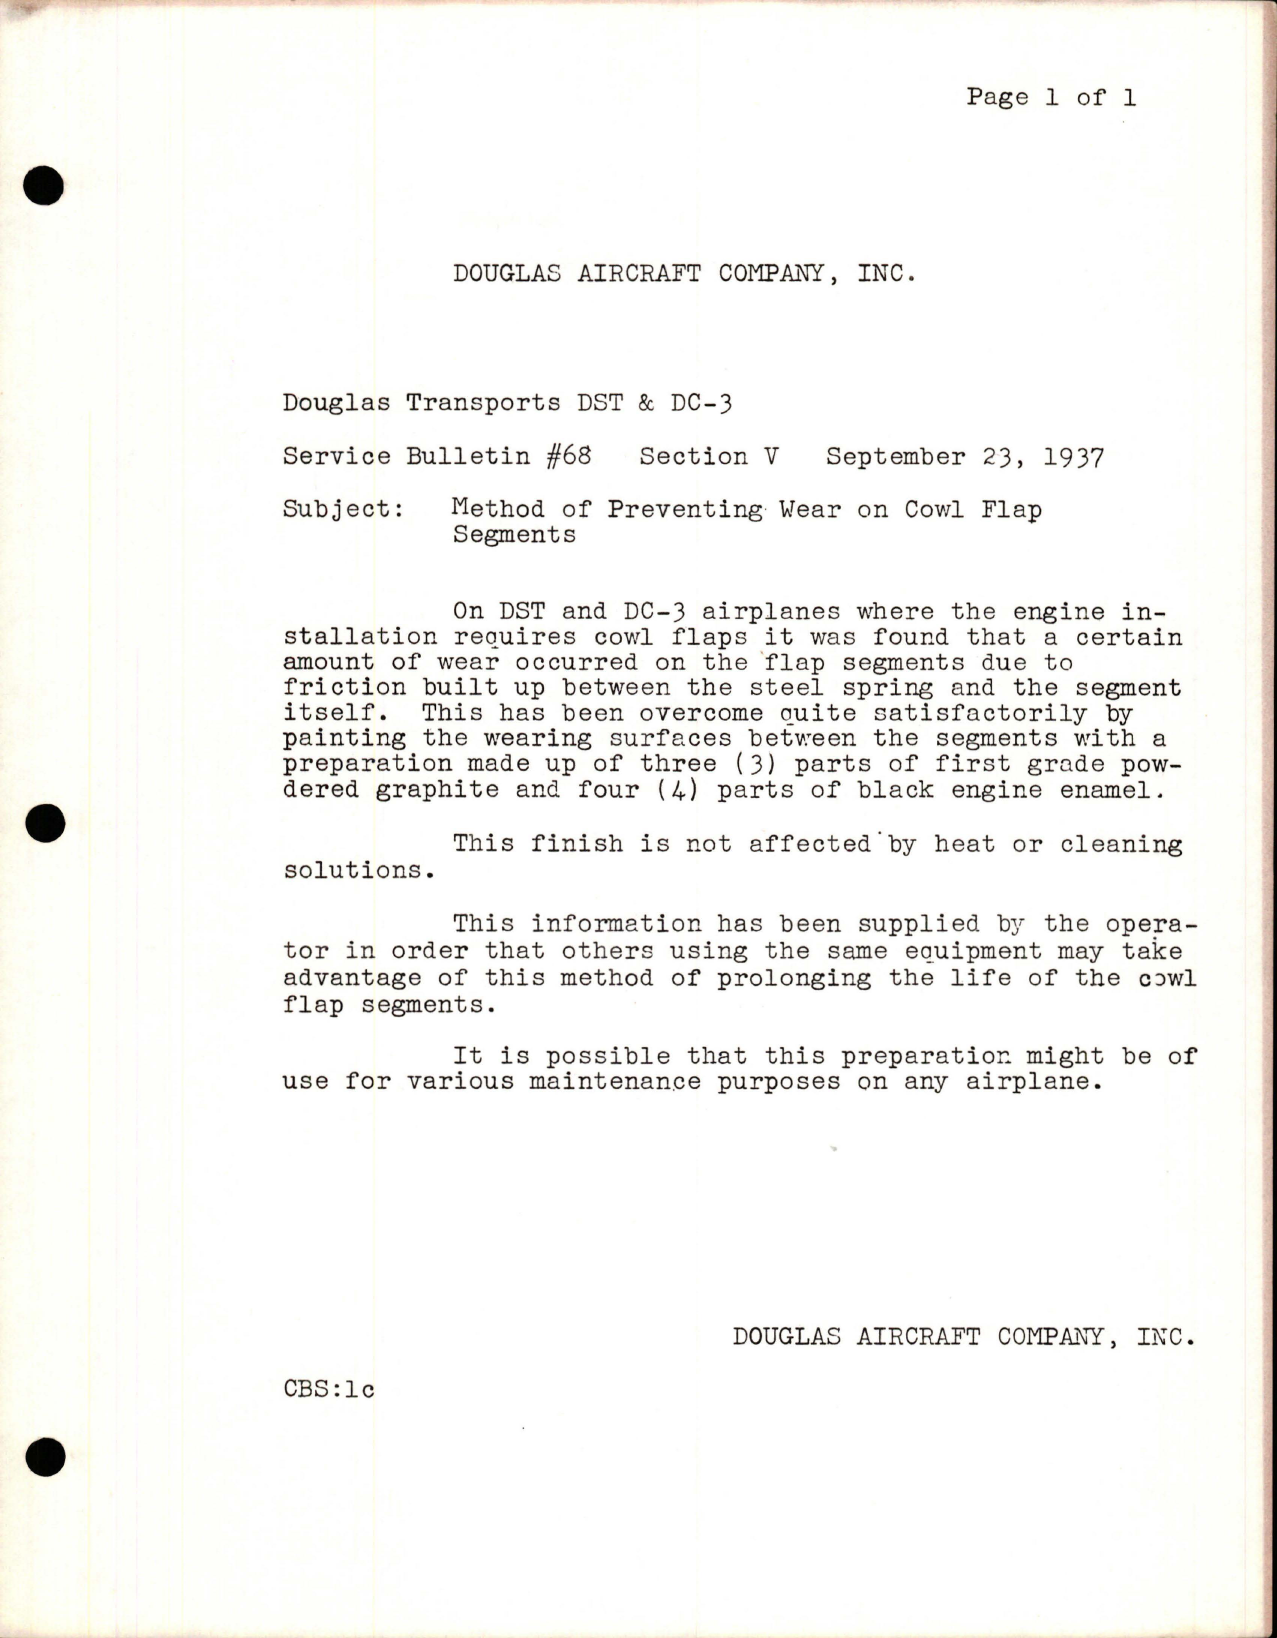 Sample page 1 from AirCorps Library document: Method of Preventing Wear on Cowl Flap Segments